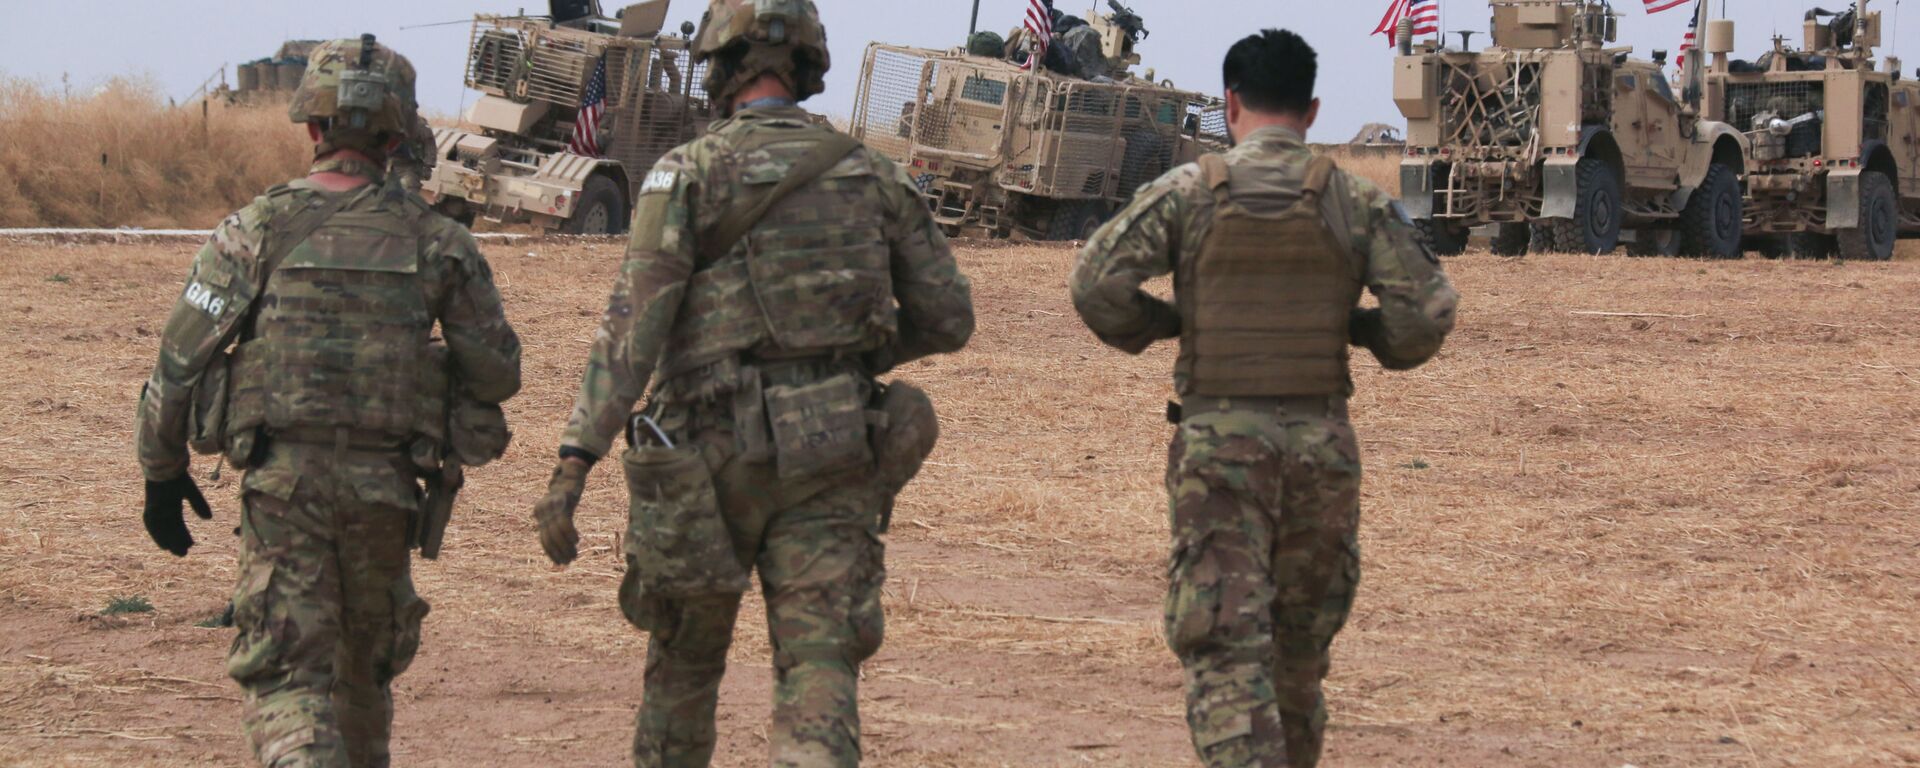 American military convoy stops near the town of Tel Tamr, north Syria, Sunday, Oct. 20, 2019 - Sputnik International, 1920, 19.08.2020